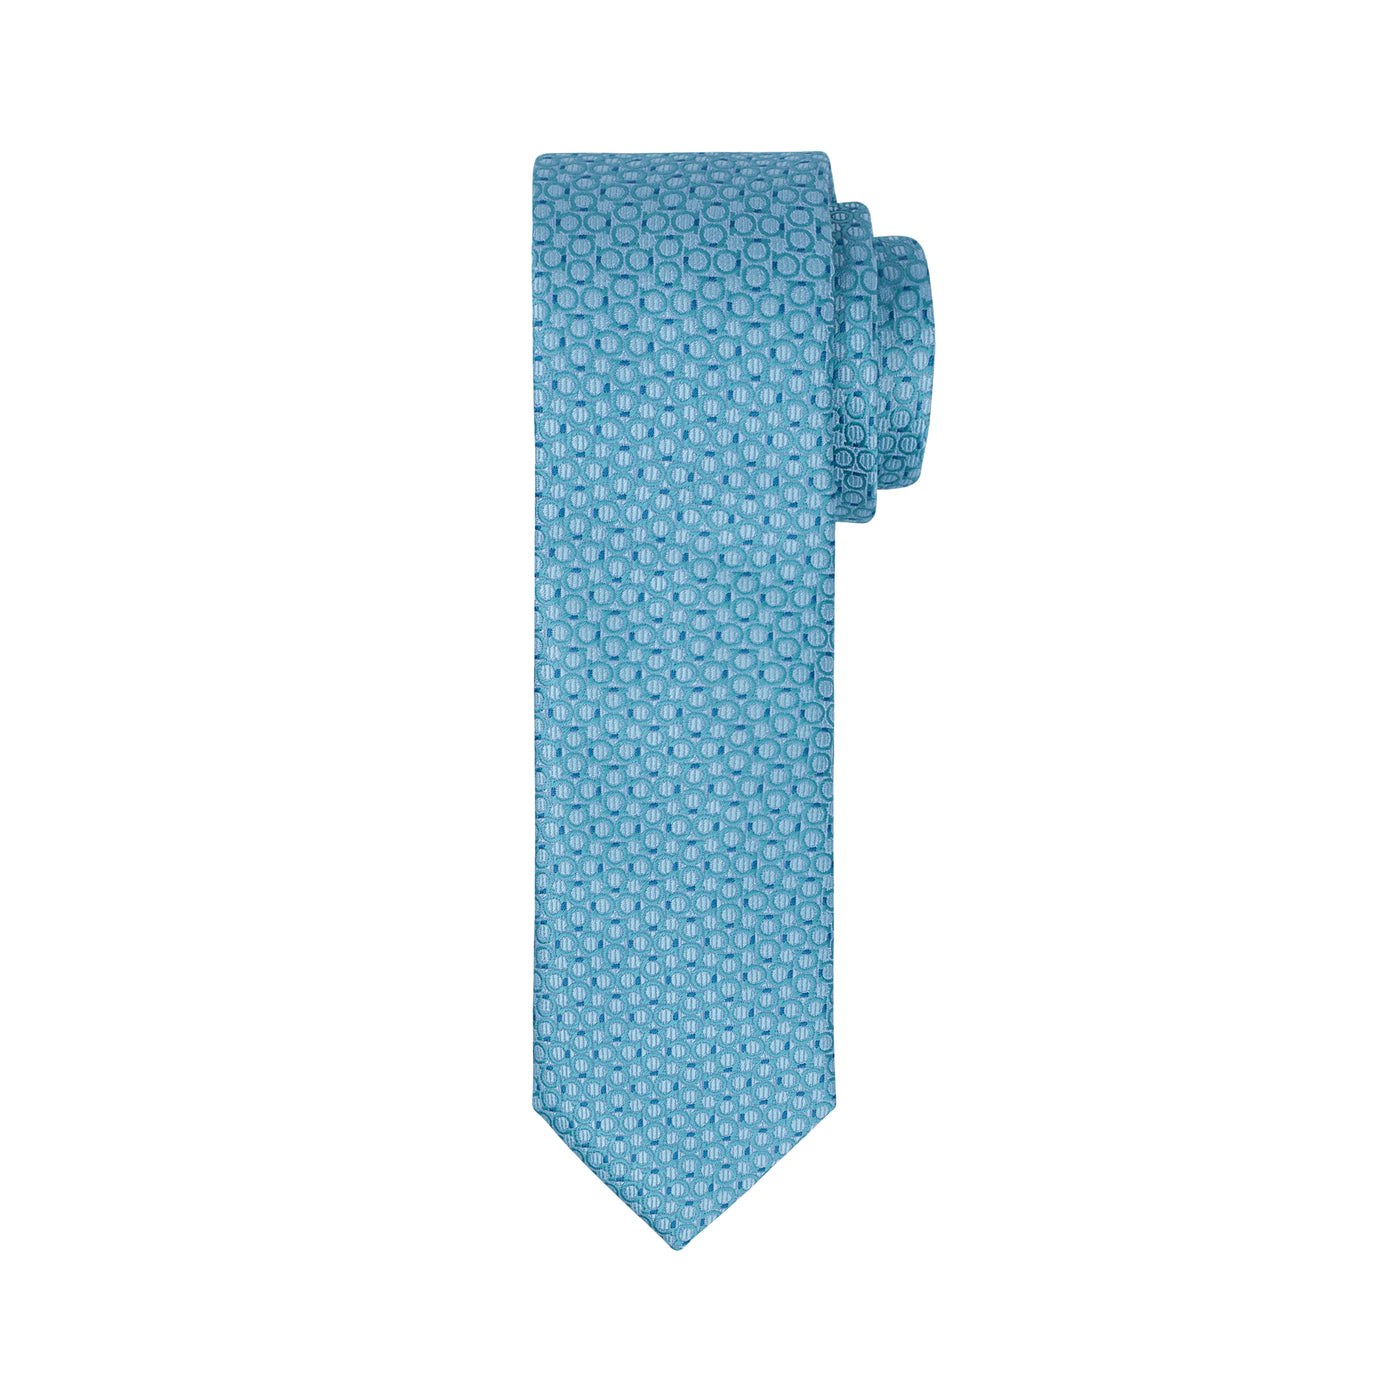 Match Tie in Teal